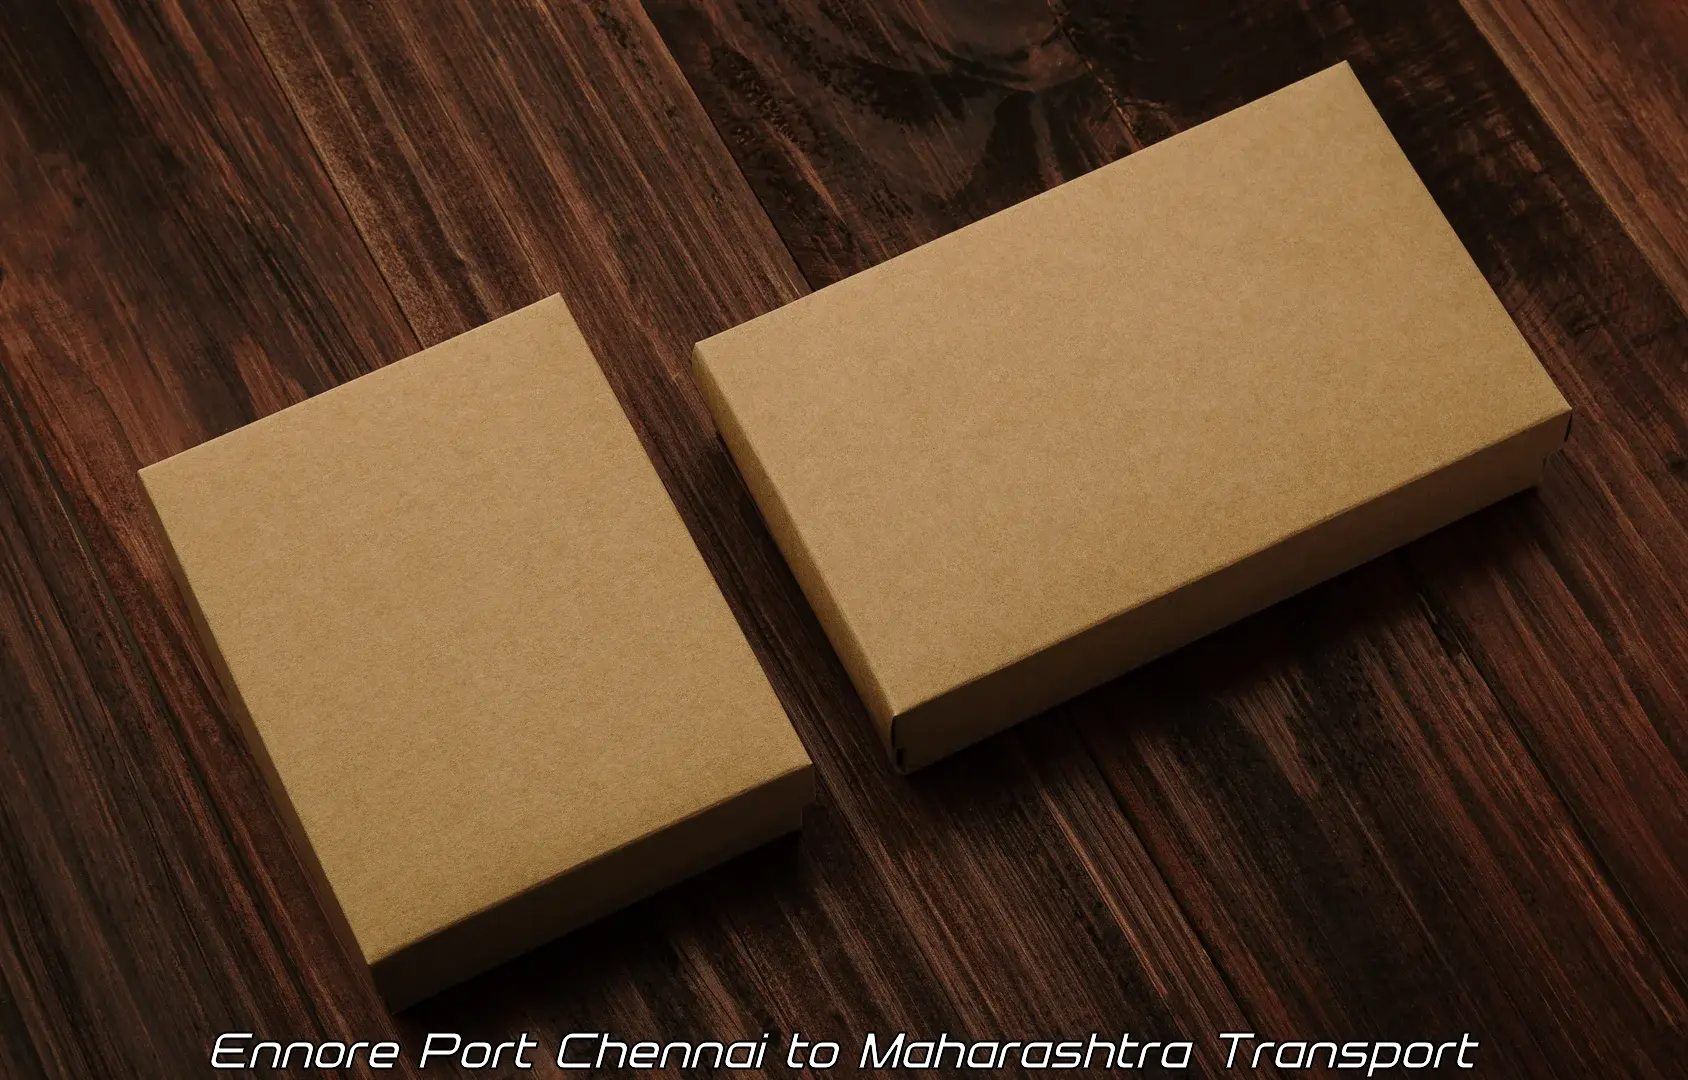 Package delivery services Ennore Port Chennai to Latur